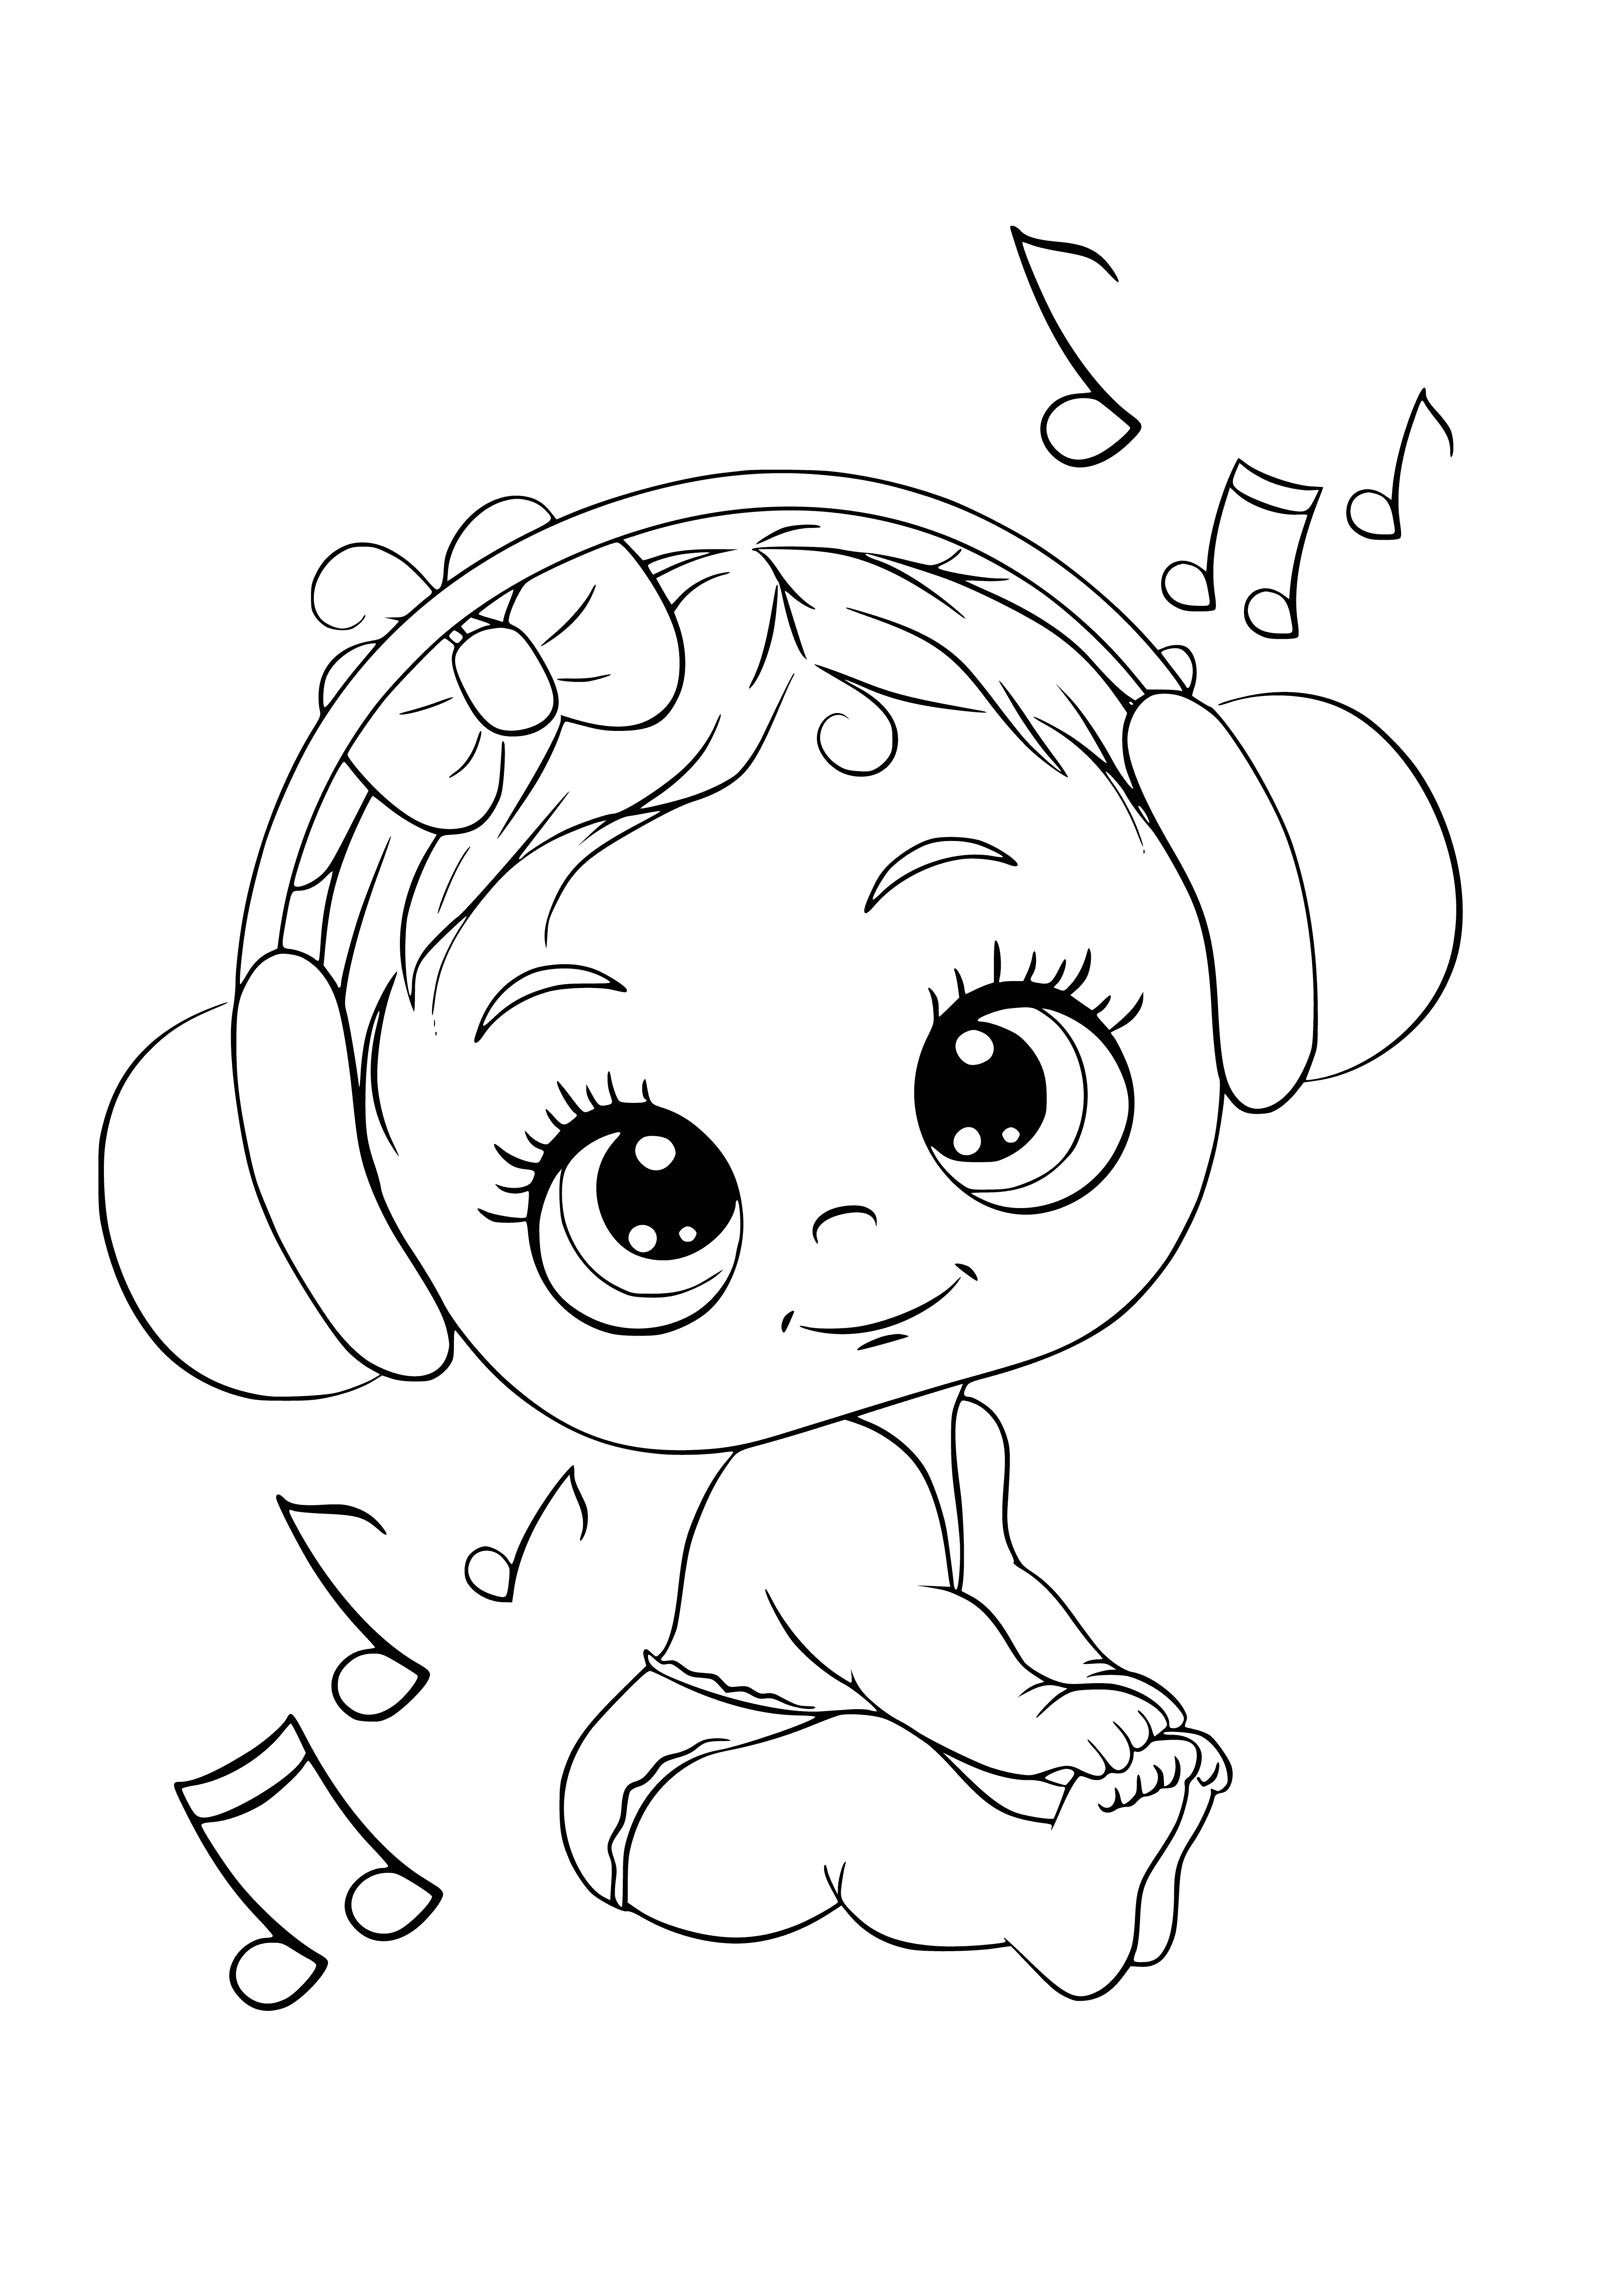 coloring page: Kawaii kid listening to music, surrounded by stars, roses, and musical notes - perfect for coloring! #cute #coloring #music